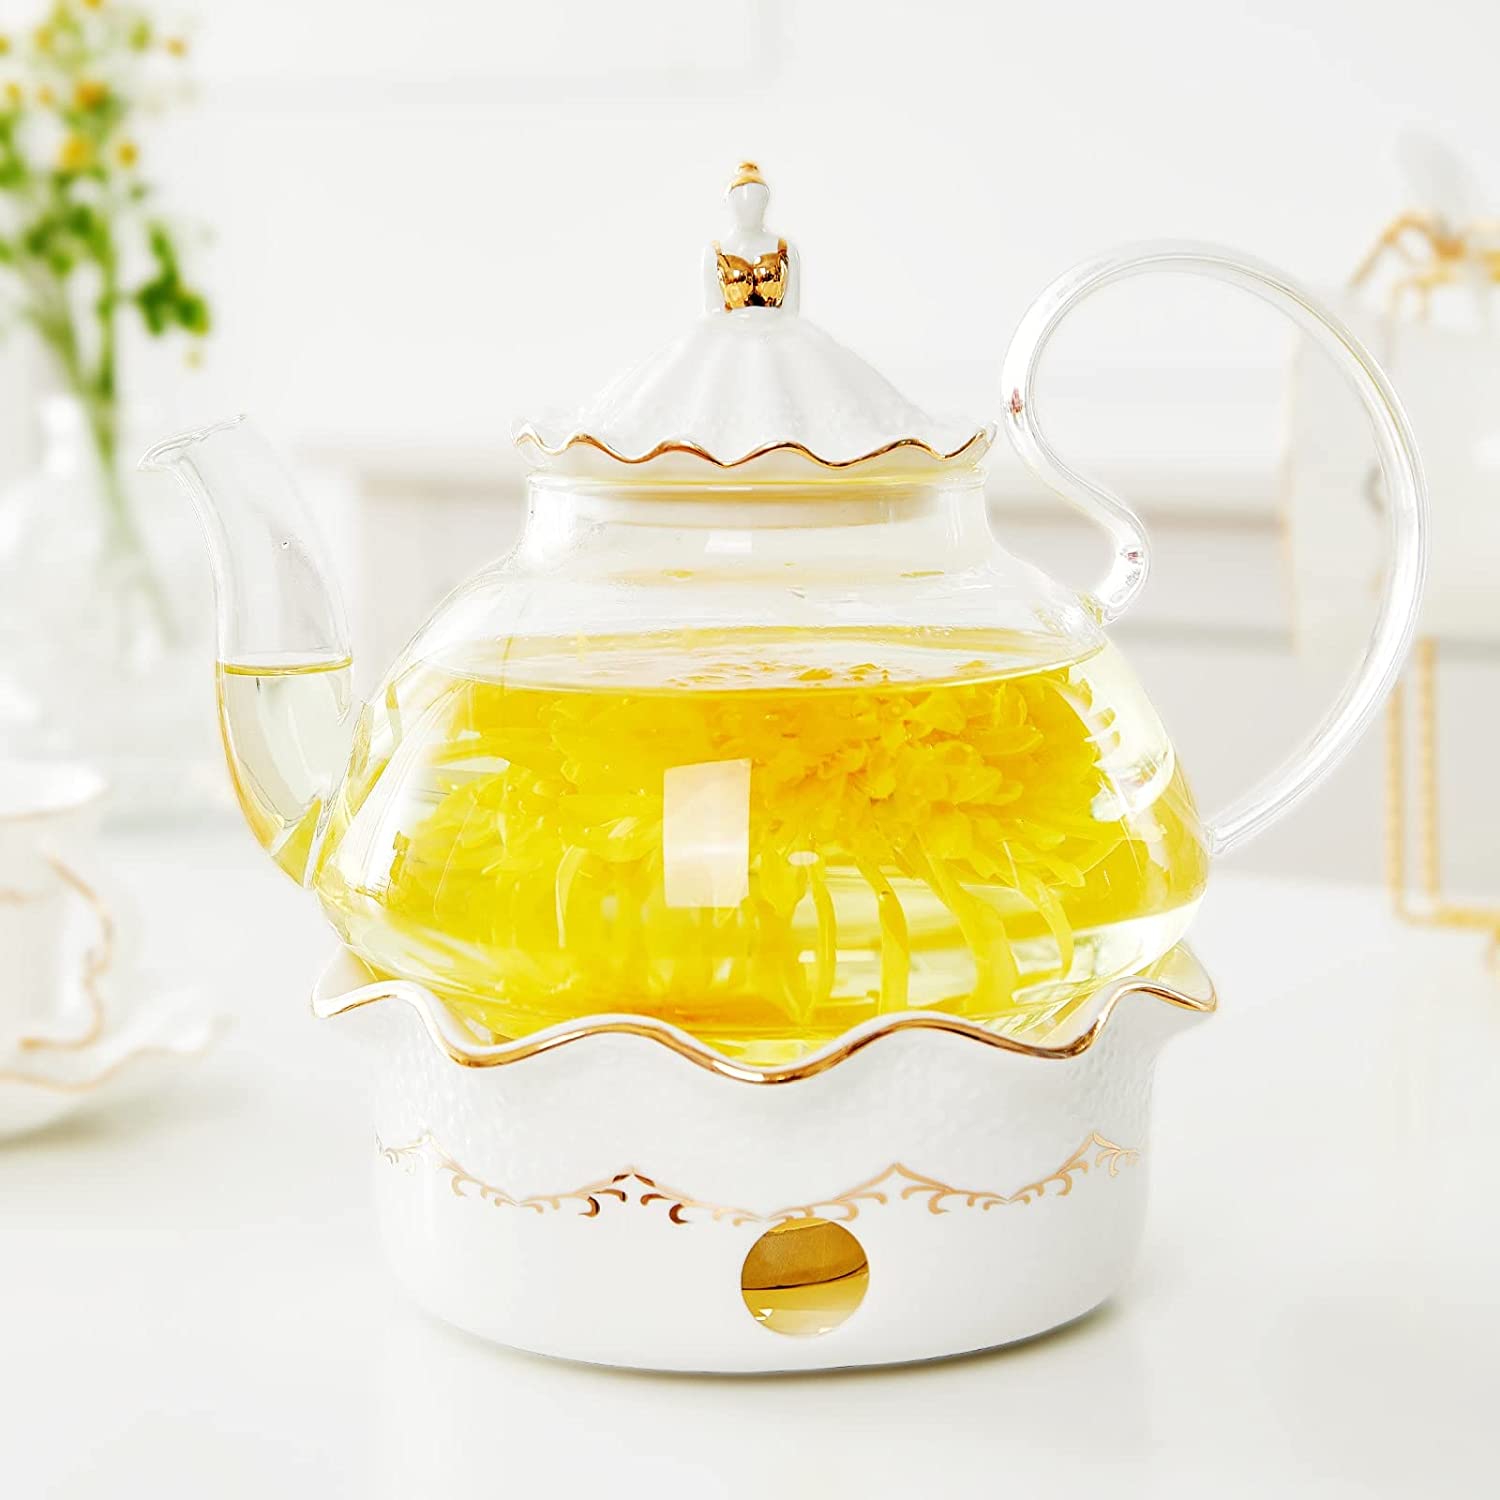 DUJUST Teapots with Teapot Warmer Set, Luxurious British Design with Relief Decor and Gold Decorations, Handmade Clear Glass Teapot with Strainer Insert, Stove-Proof Tea Party Gift (1.2 L)